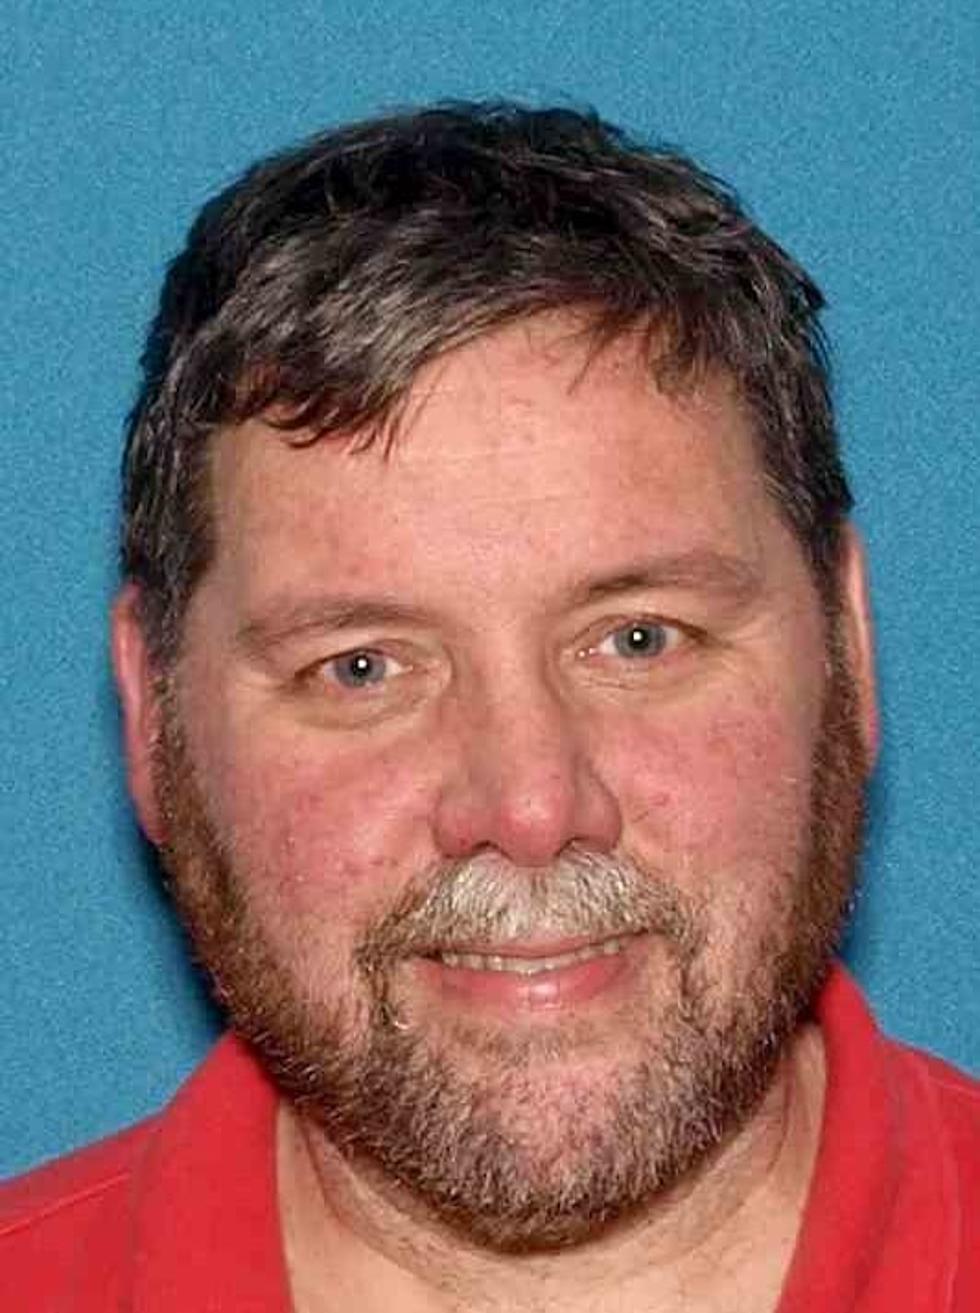 Manchester Police need your help finding missing township resident